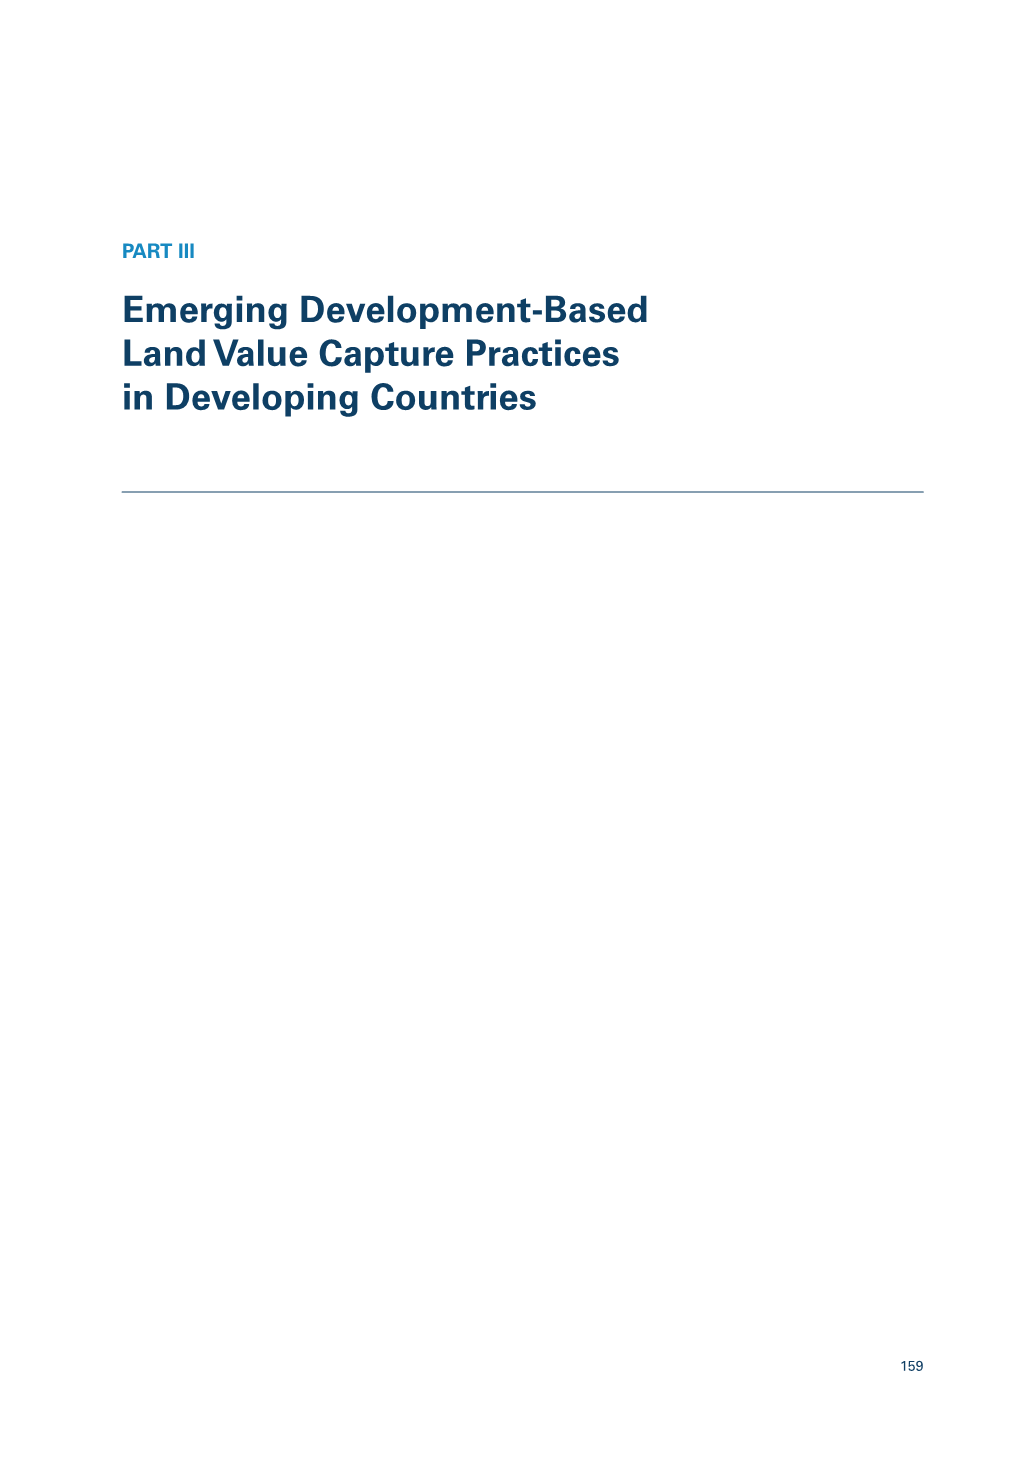 Emerging Development-Based Land Value Capture Practices in Developing Countries